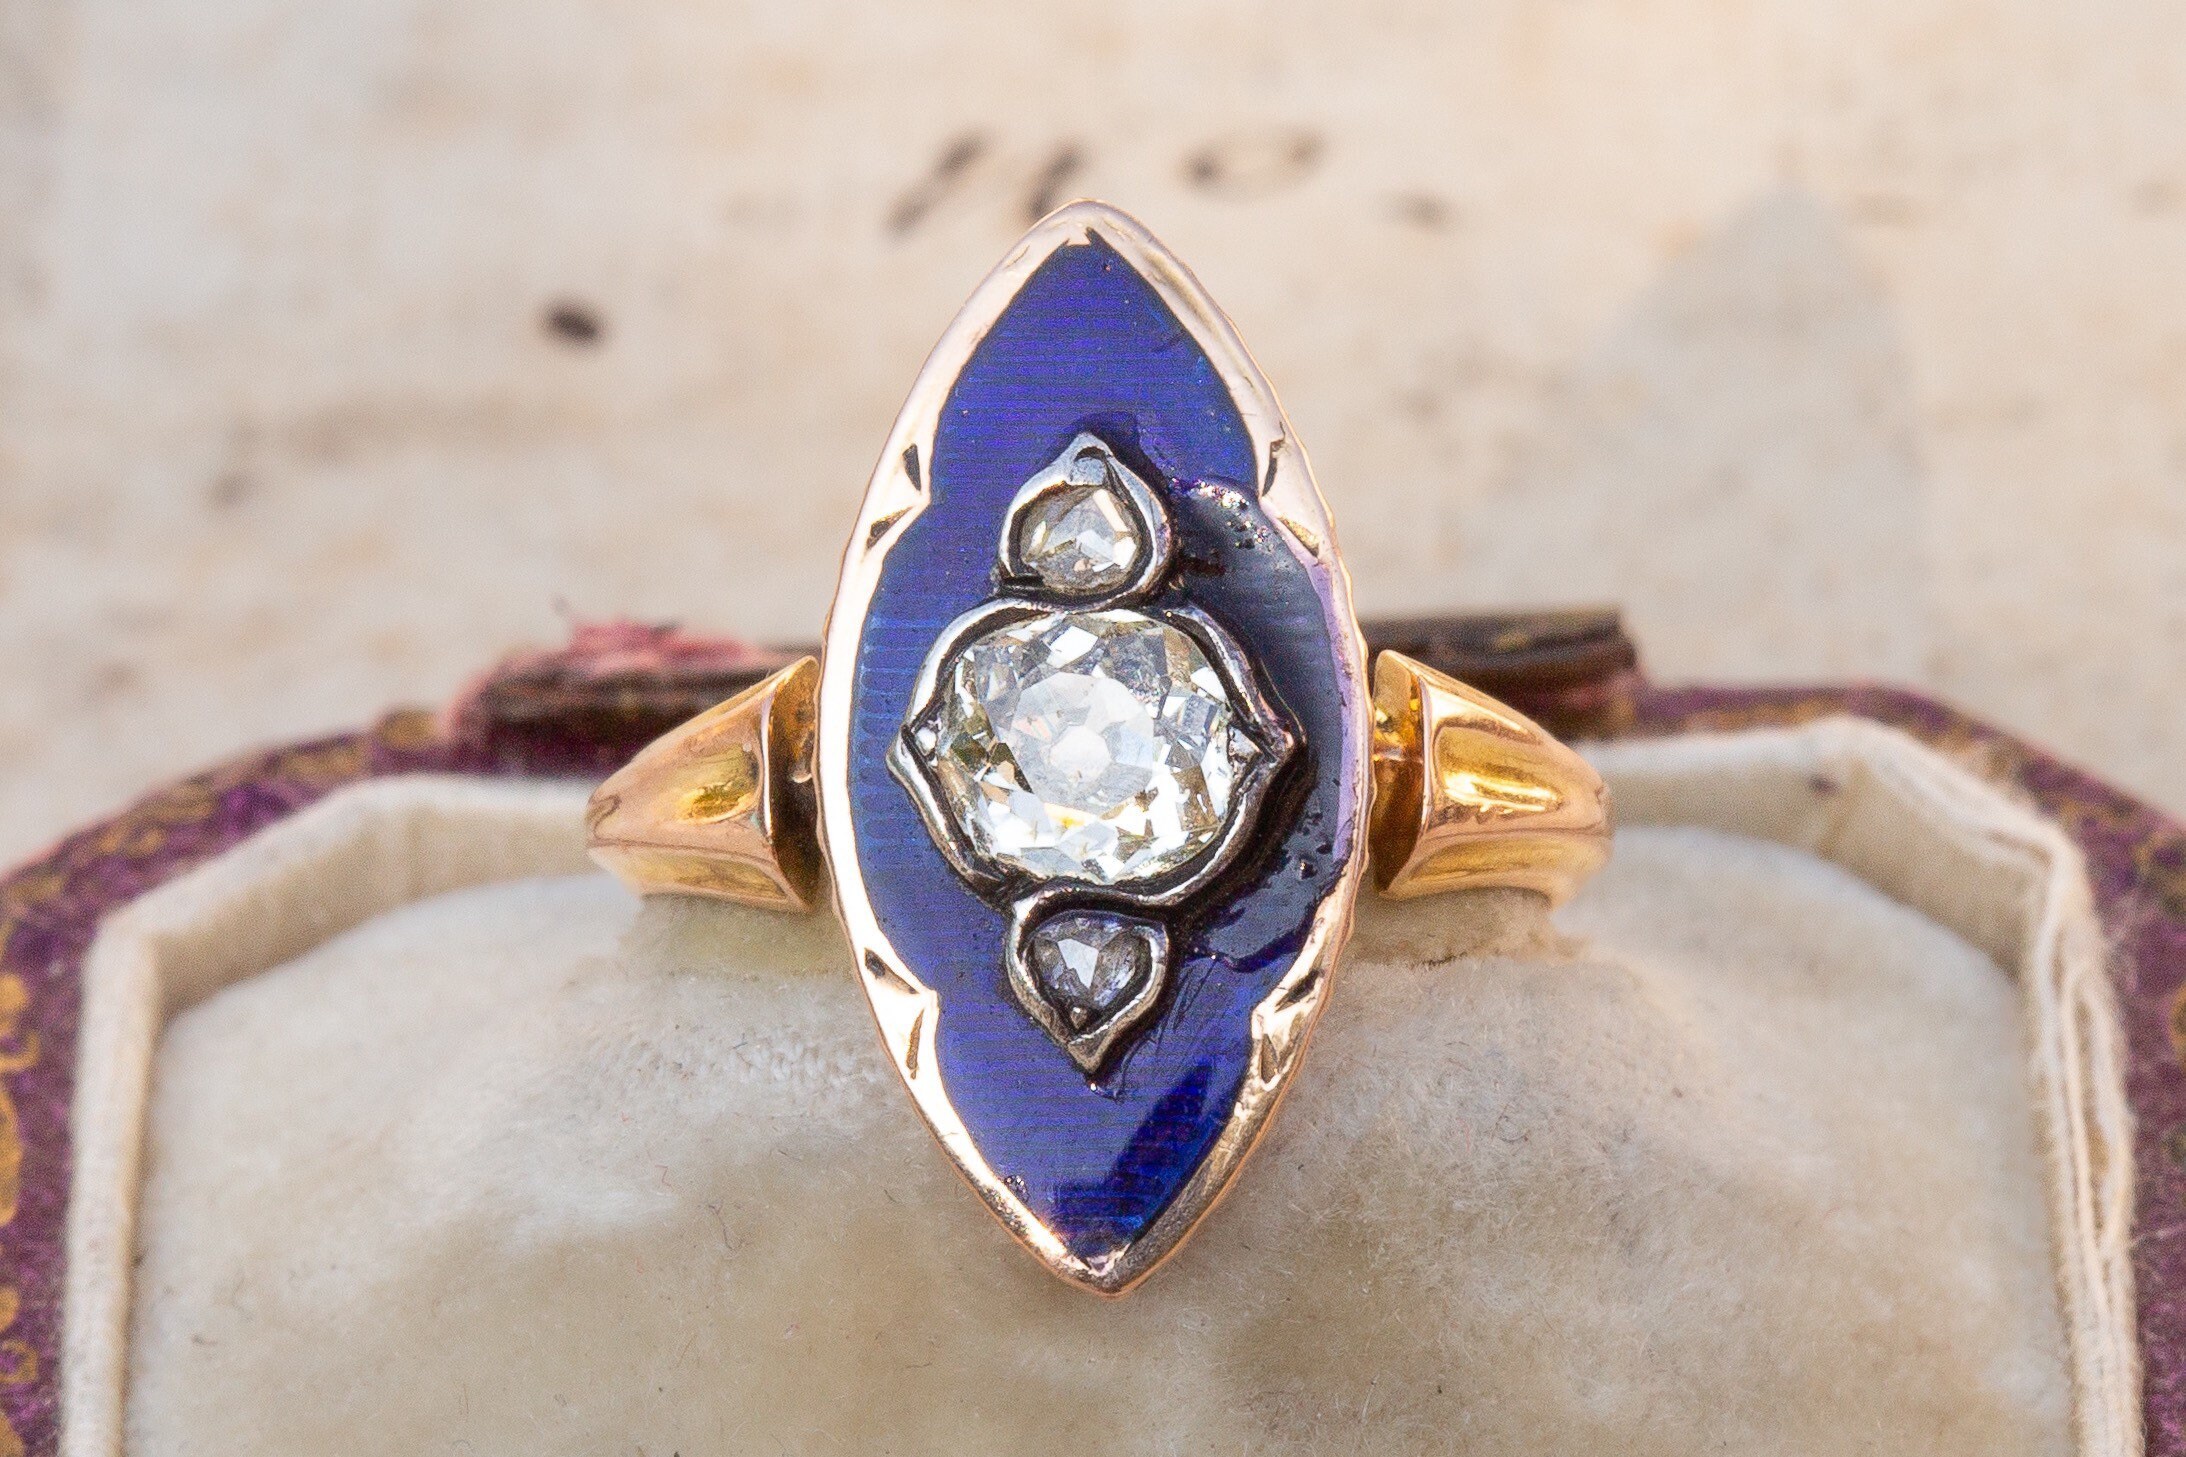 Early-Victorian Enamel & Diamond Ring — Isadoras Antique Jewelry